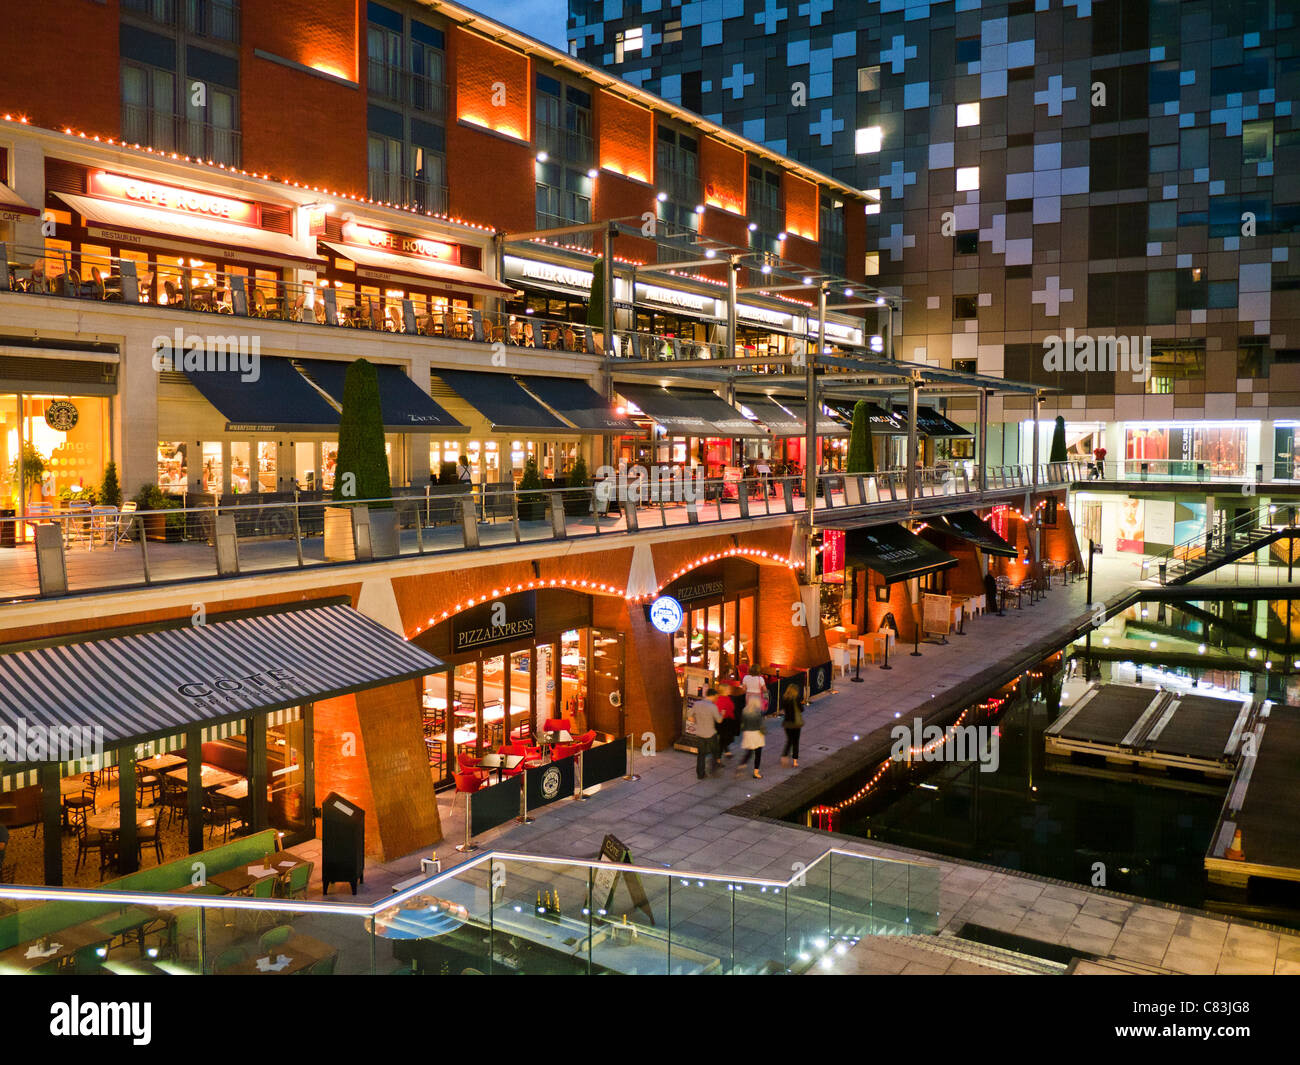 Restaurants and bars alongside the canal at The Mailbox, Birmingham